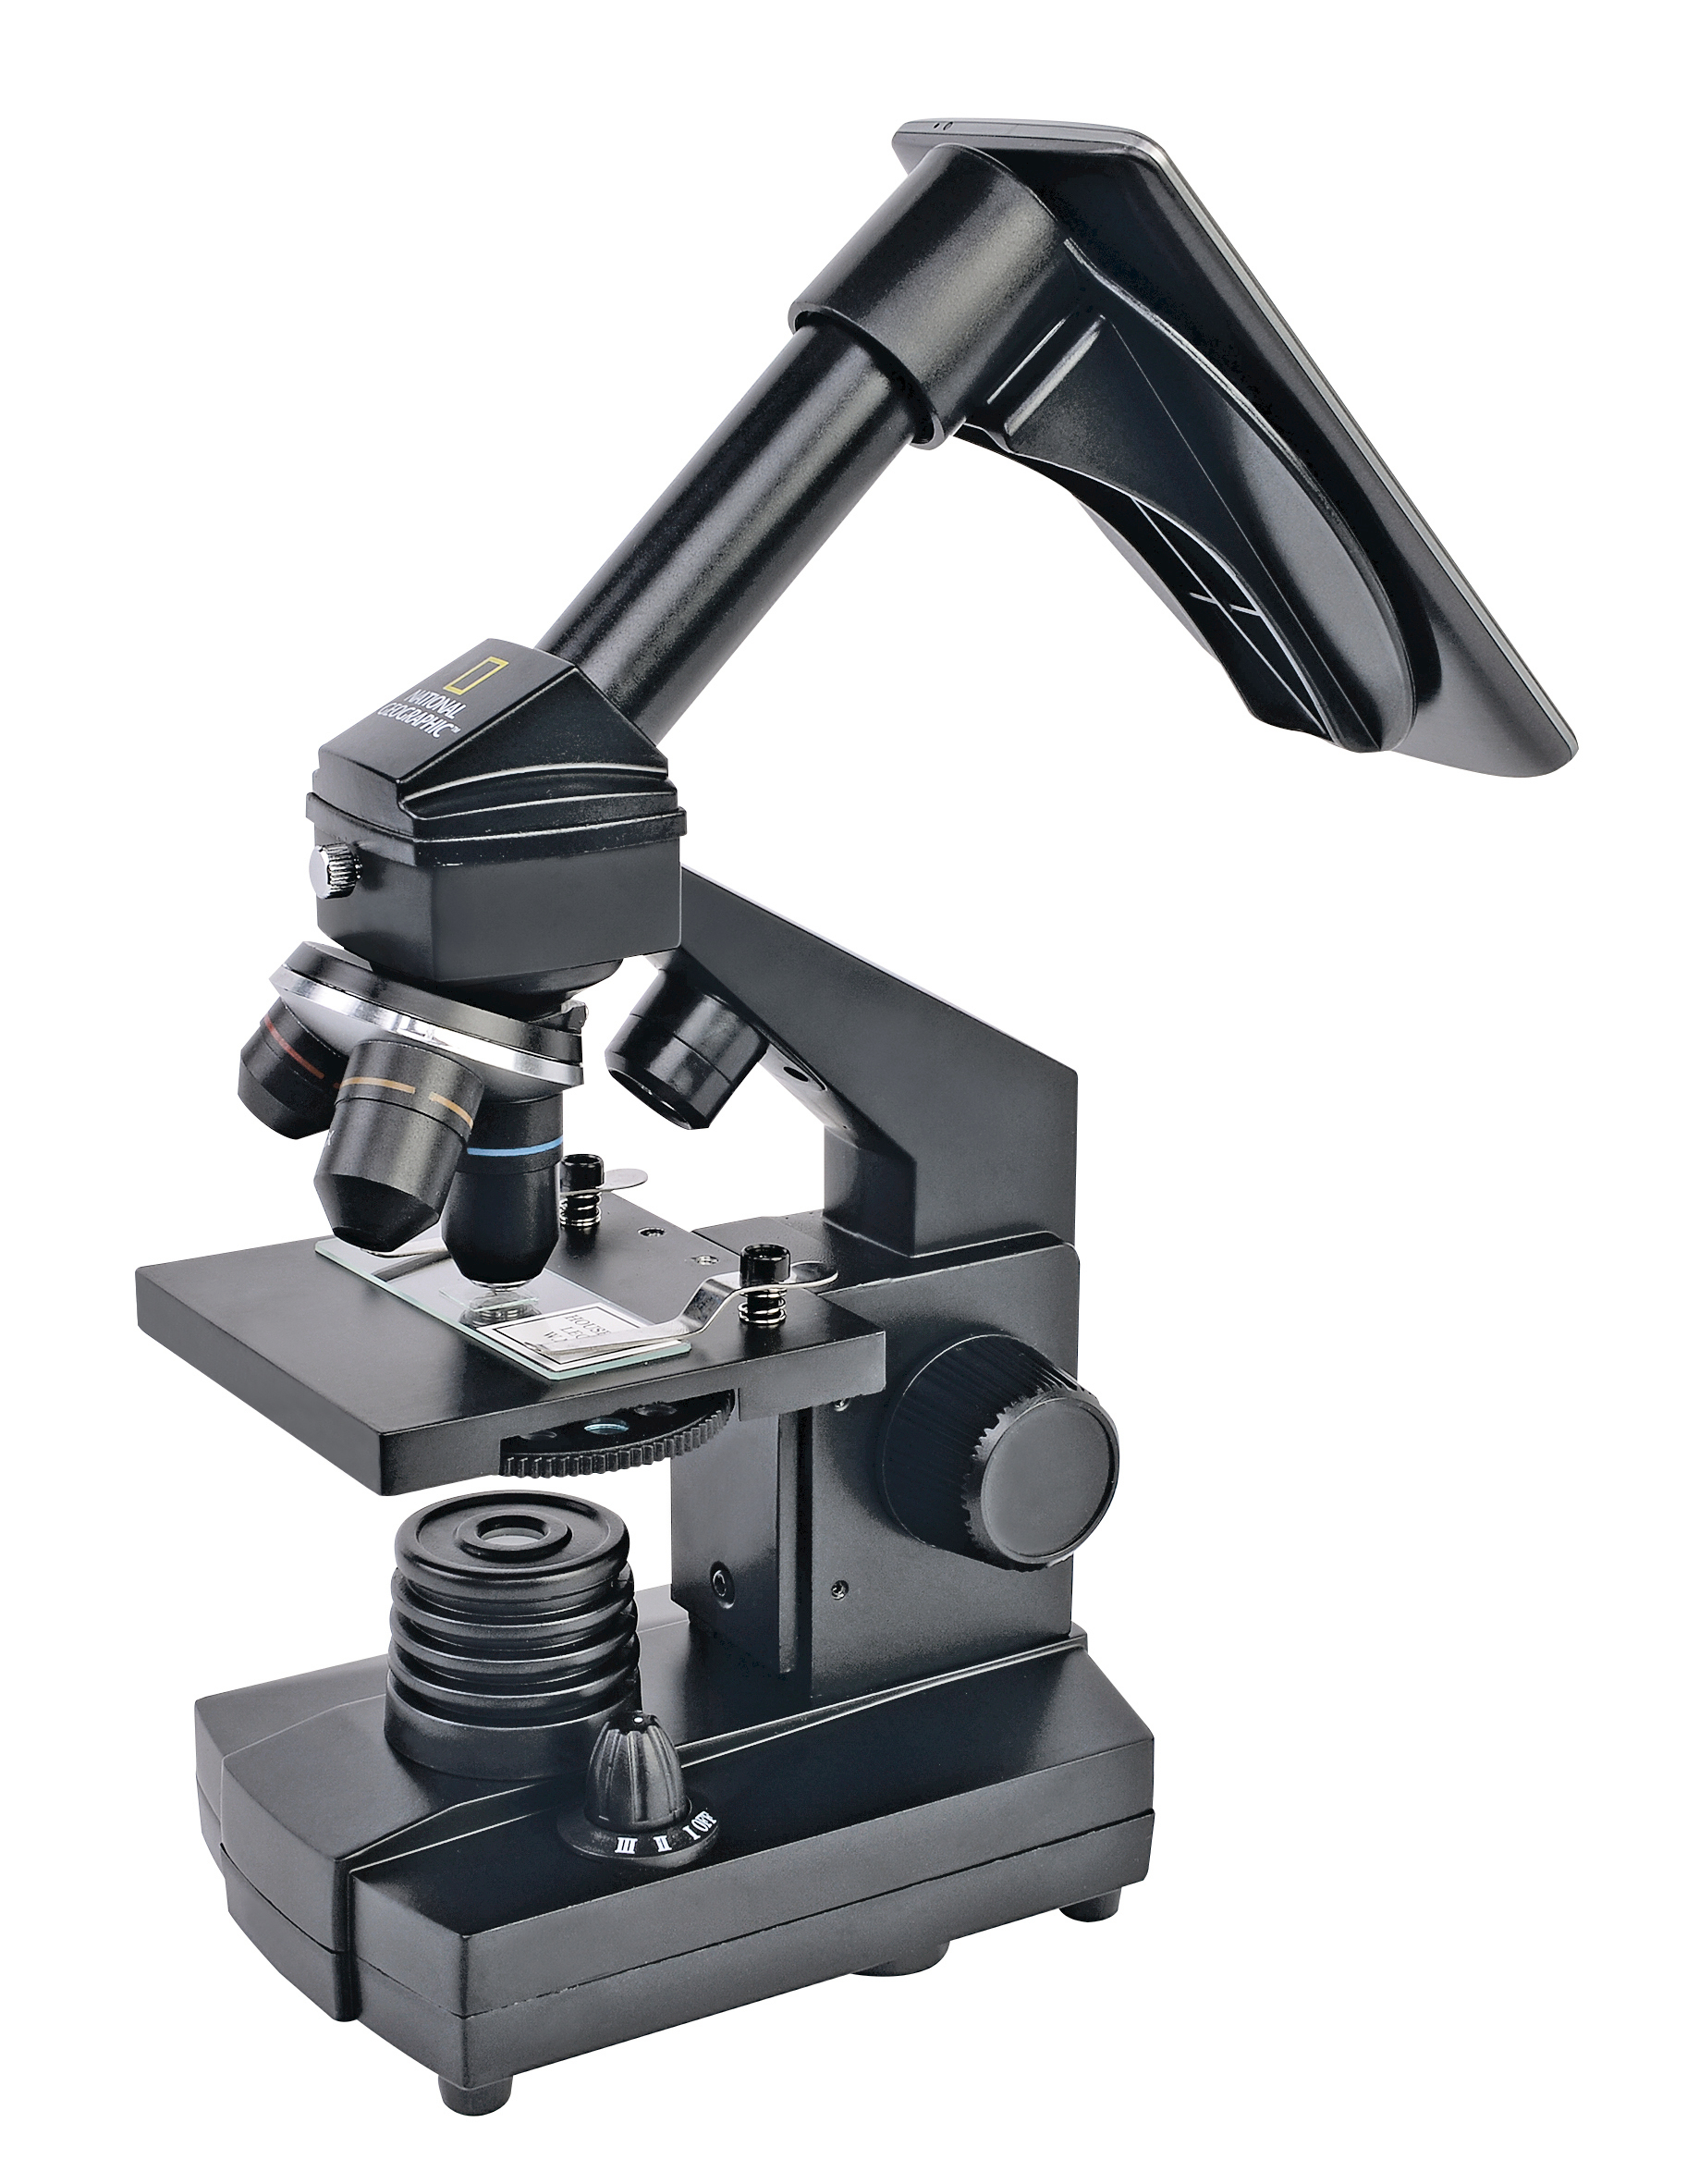 NATIONAL GEOGRAPHIC 40x-1280x Microscope avec Support pour Smartphone